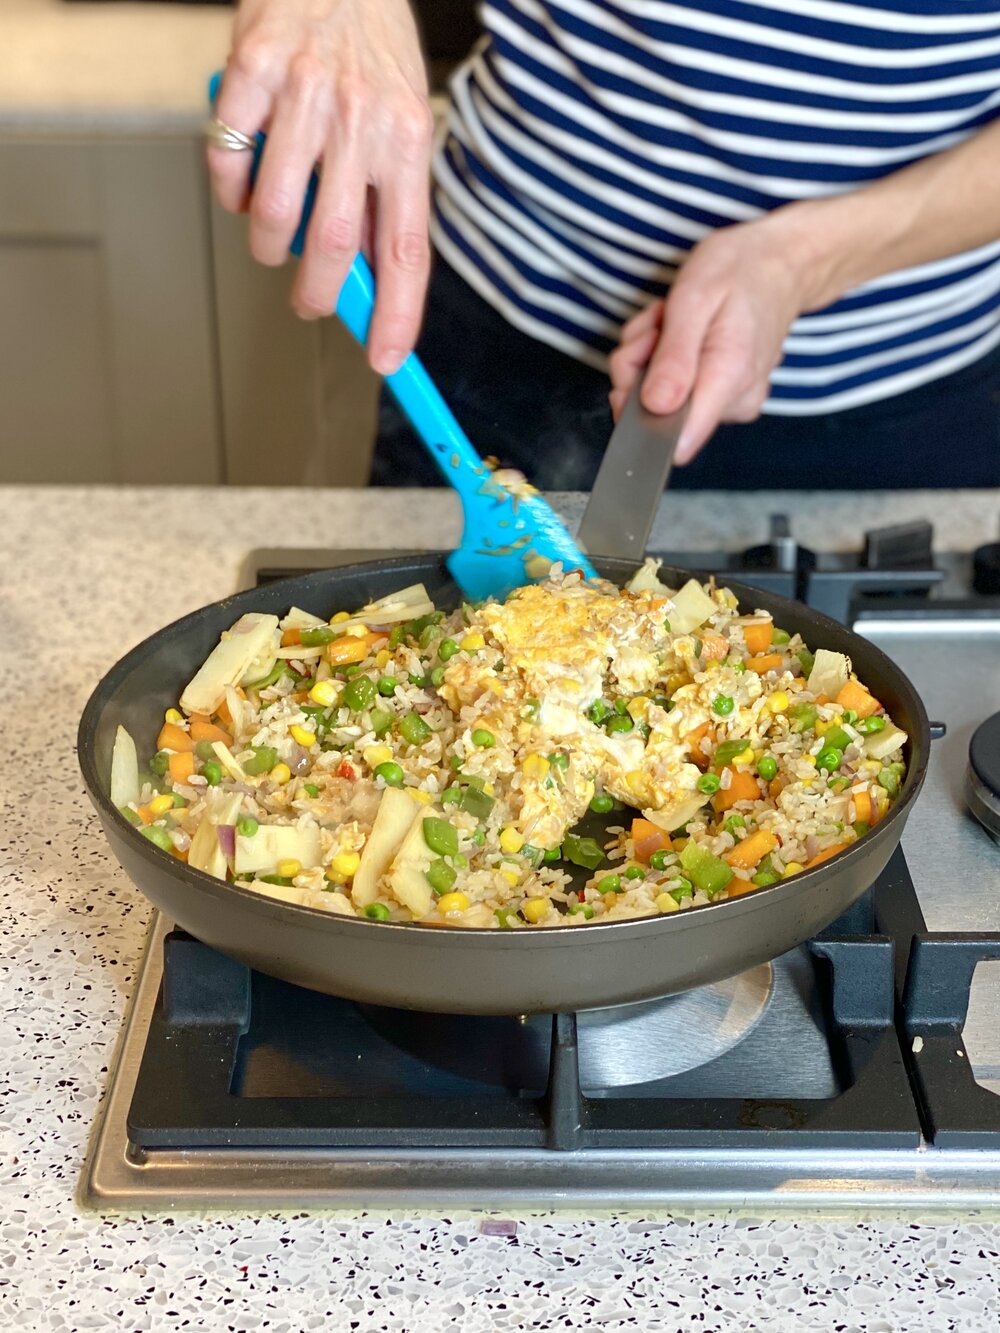 Making egg-fried rice in a frying pan